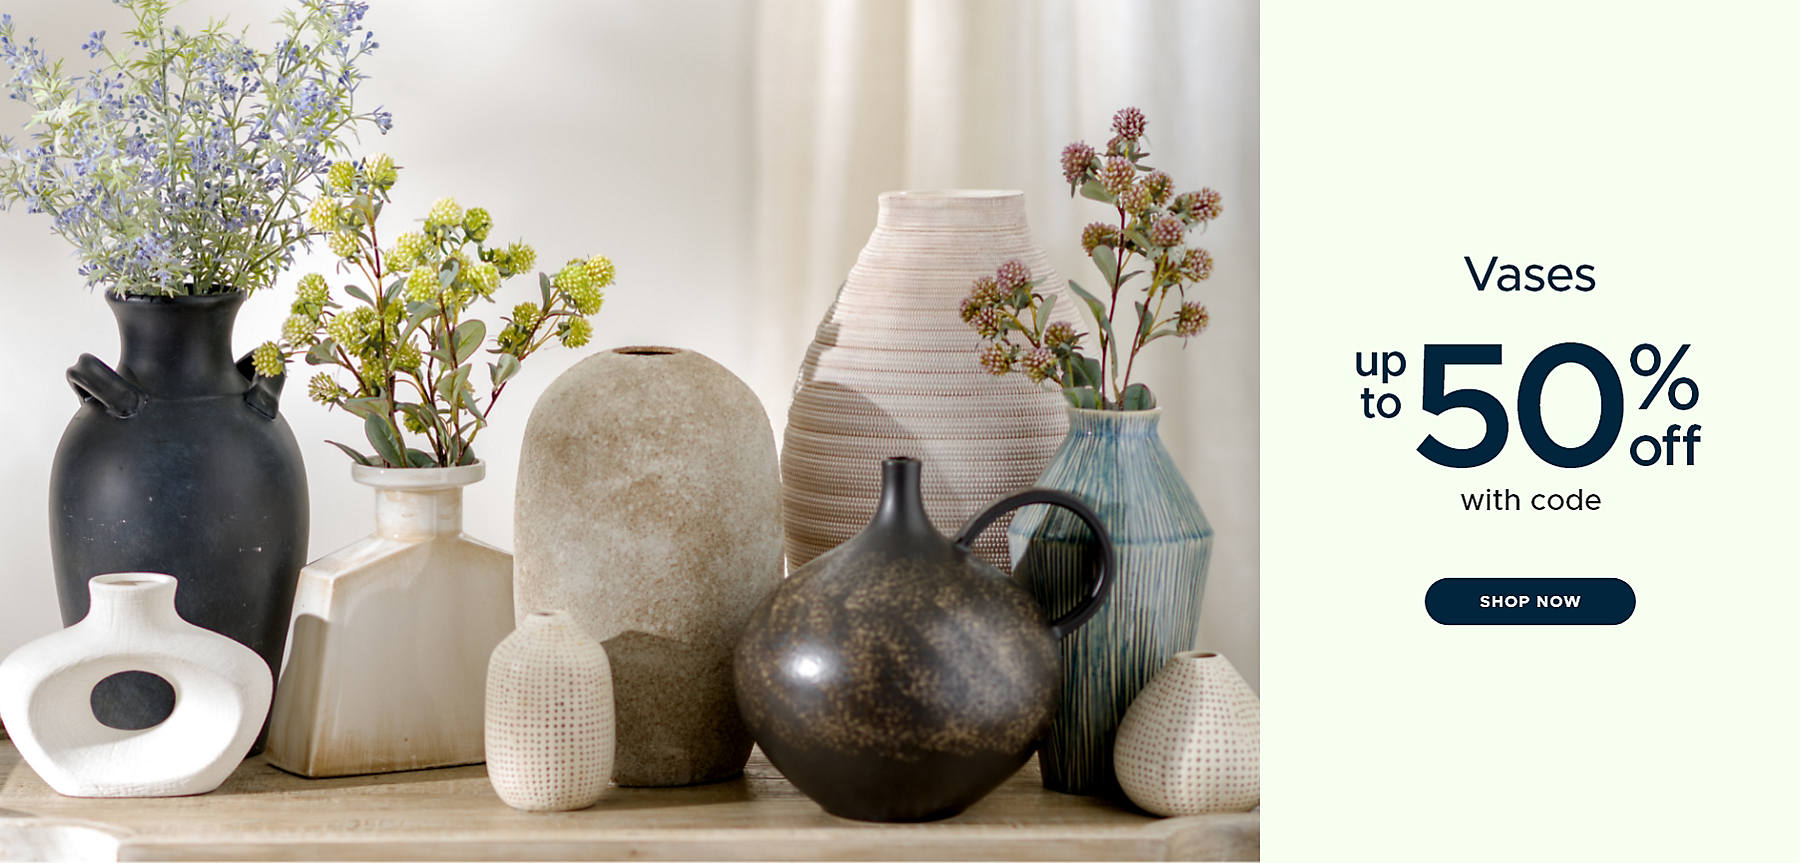 Vases up to 50% off with code shop now